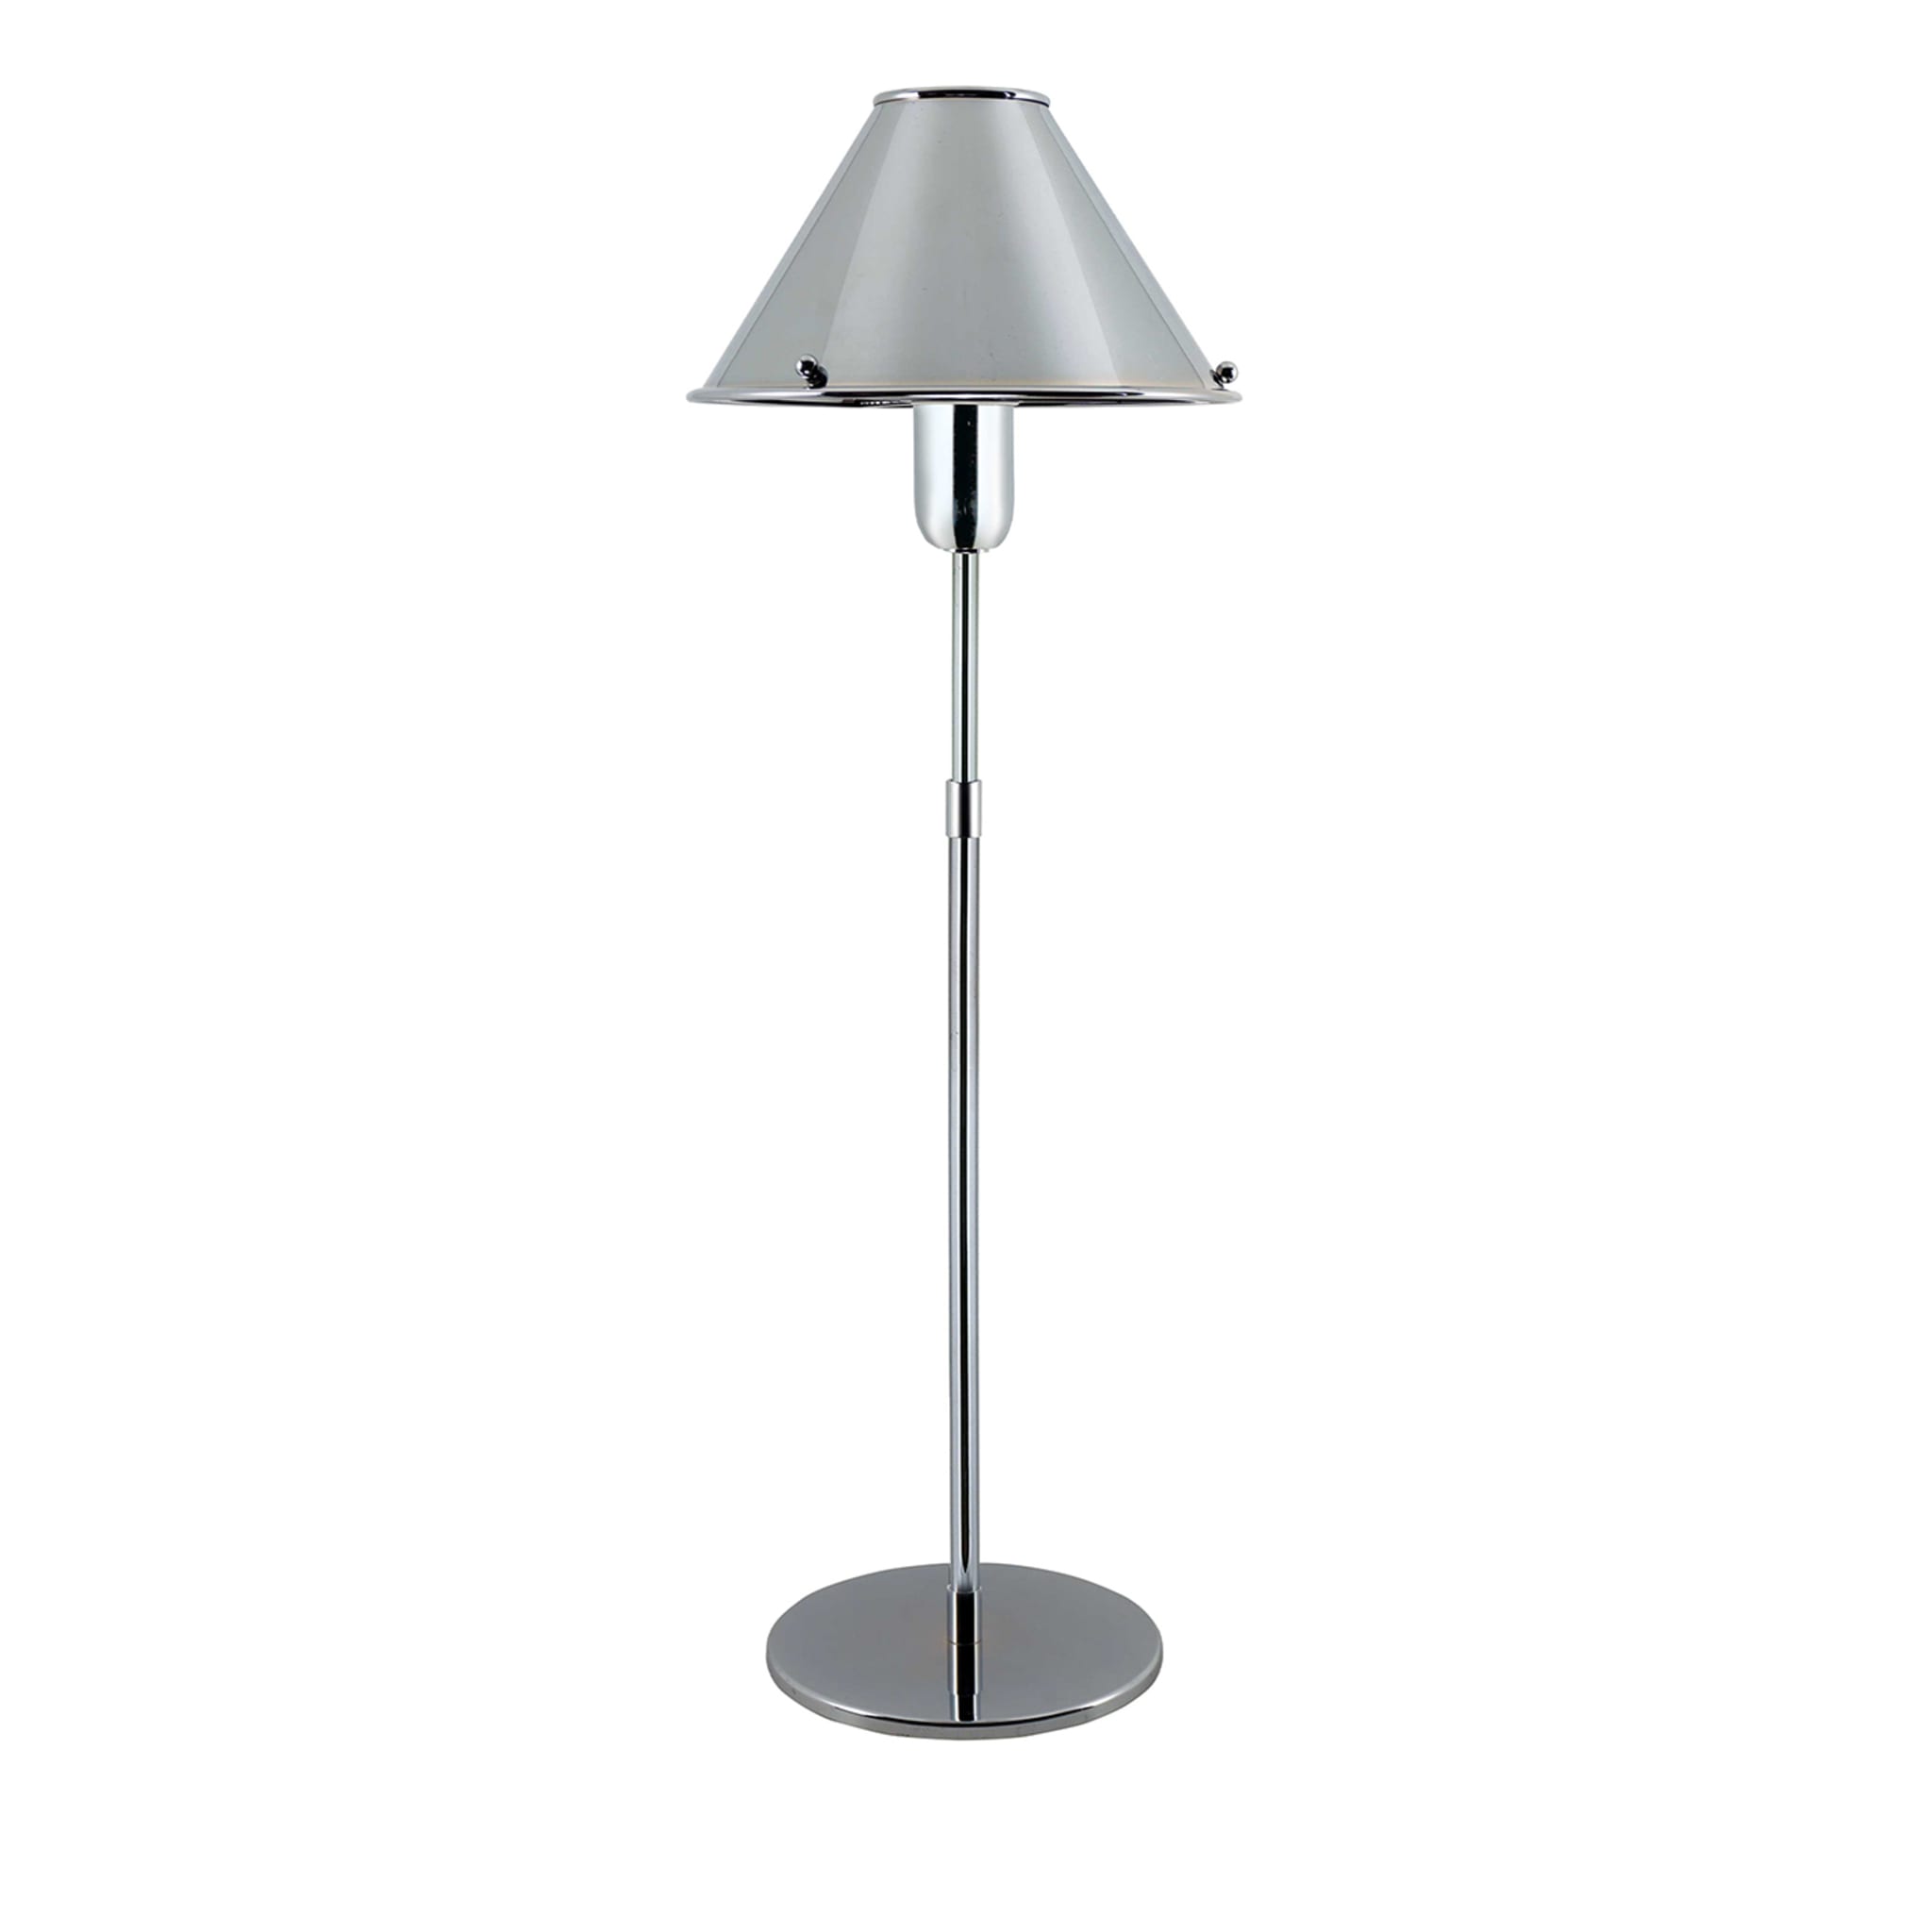 Alicya M341 Table Lamp by Stefano Tabarin - Main view